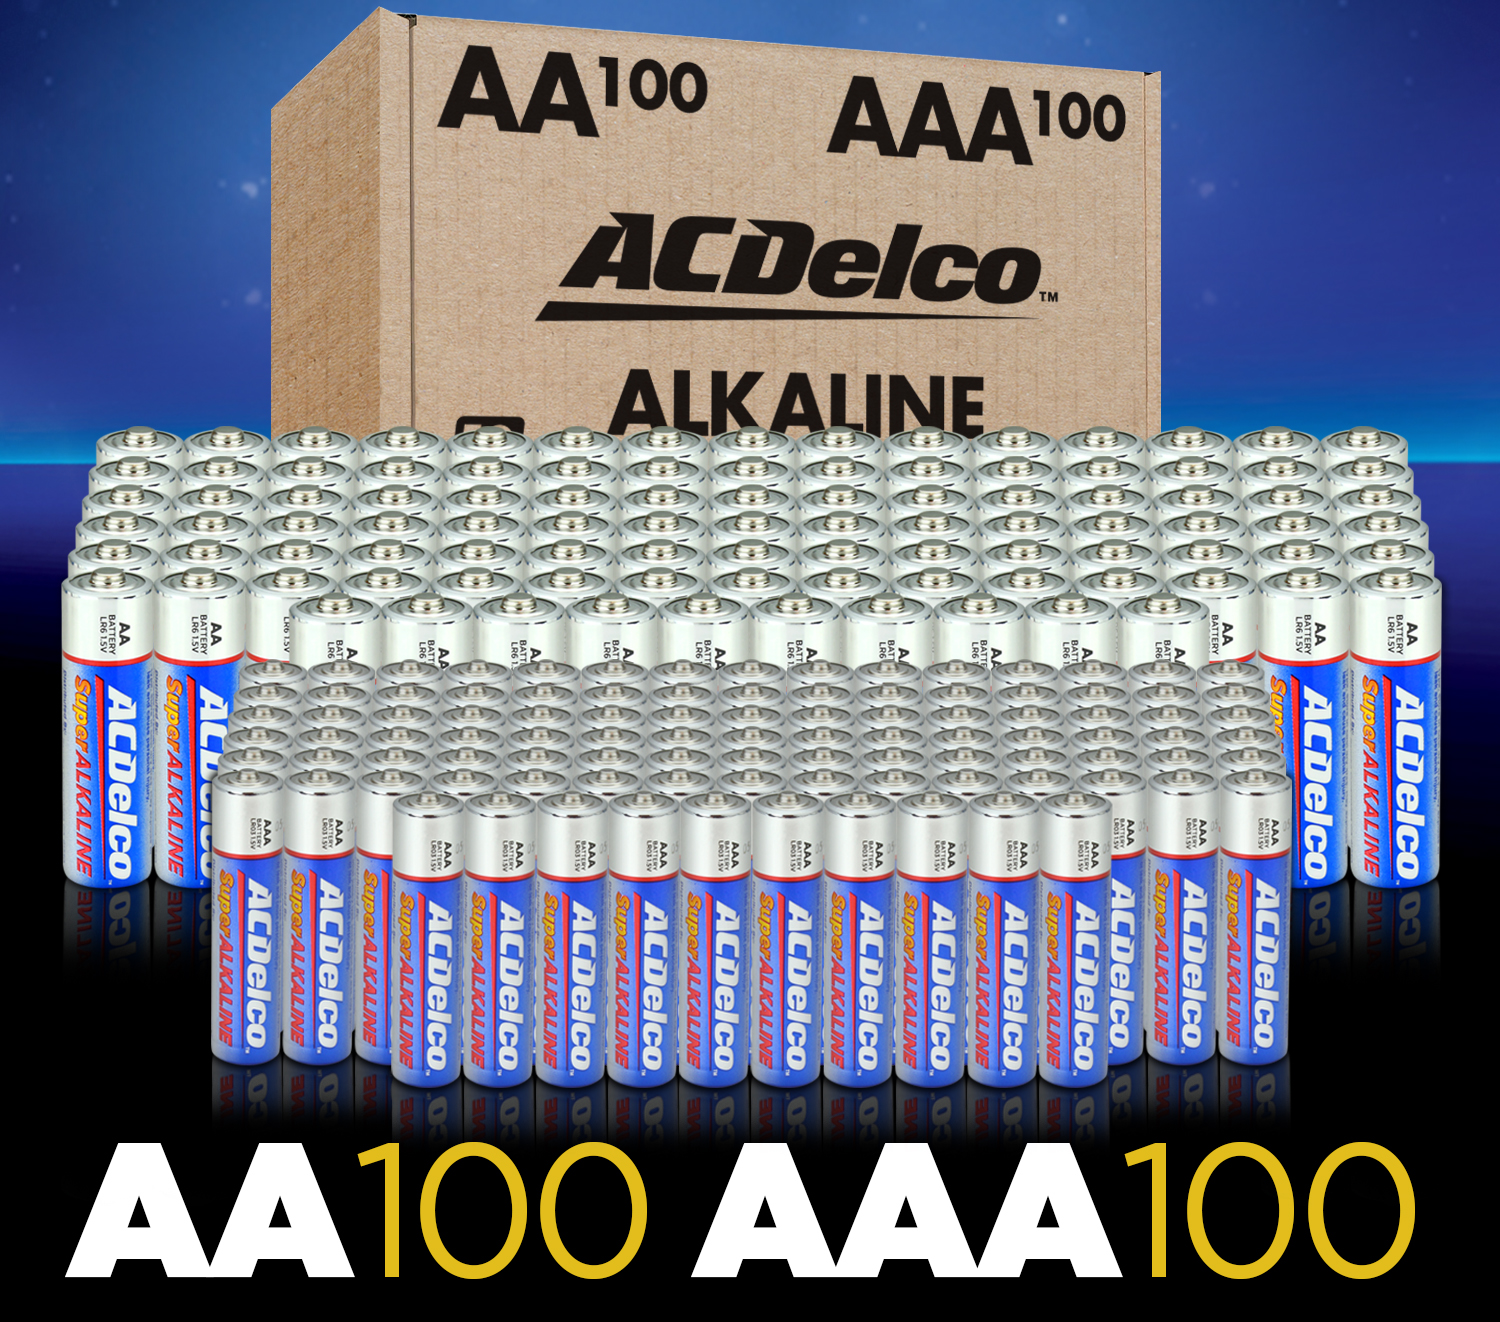 ACDelco AA and AAA Super Alkaline Batteries, 100-Count of AA and 100-Count of AAA - image 2 of 10